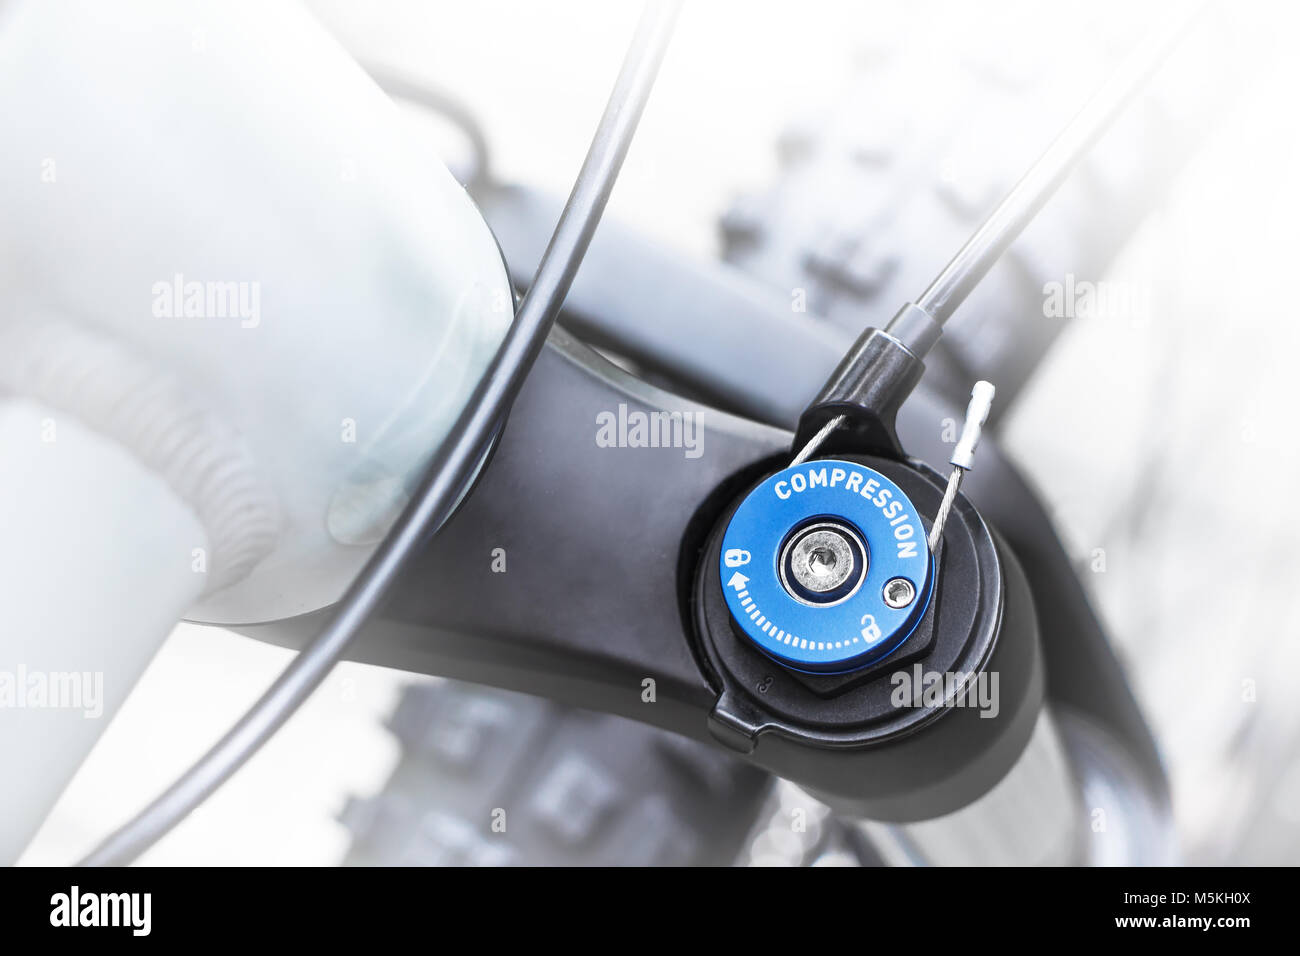 Shock Absorber And Gear Detail Close Up Shot Of Top Cap Of Mountainbike Front Suspension That Is Adjustable On High And Low Speed Compression Stock Photo Alamy